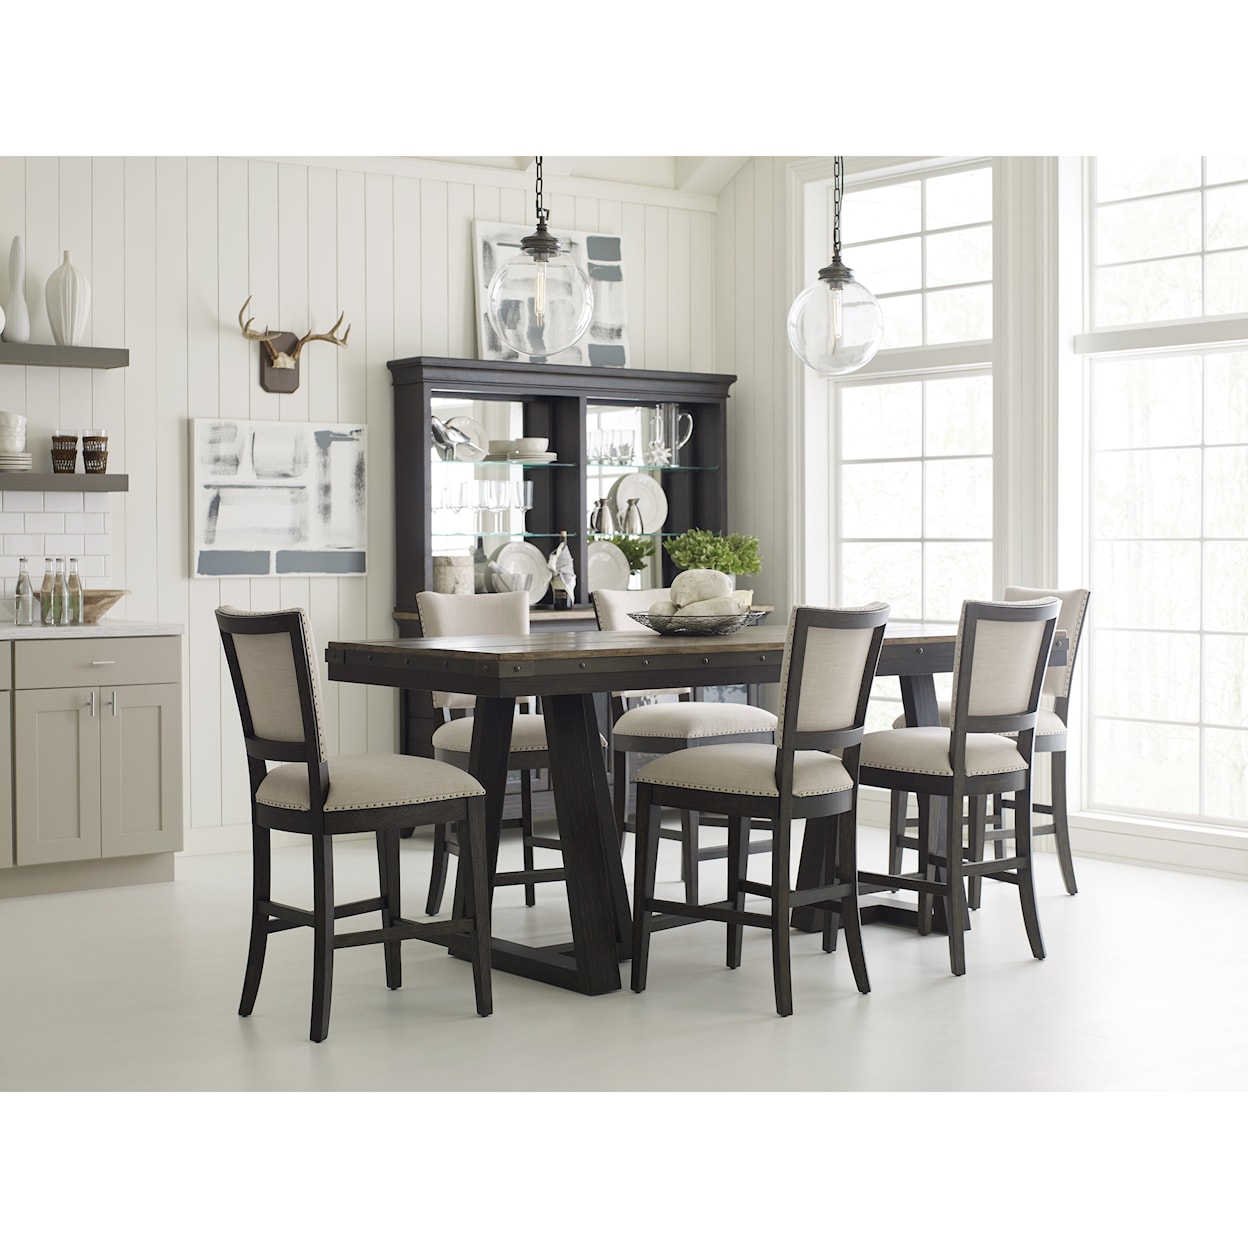 Kincaid Furniture Plank Road Kimler Counter Height Dining Table